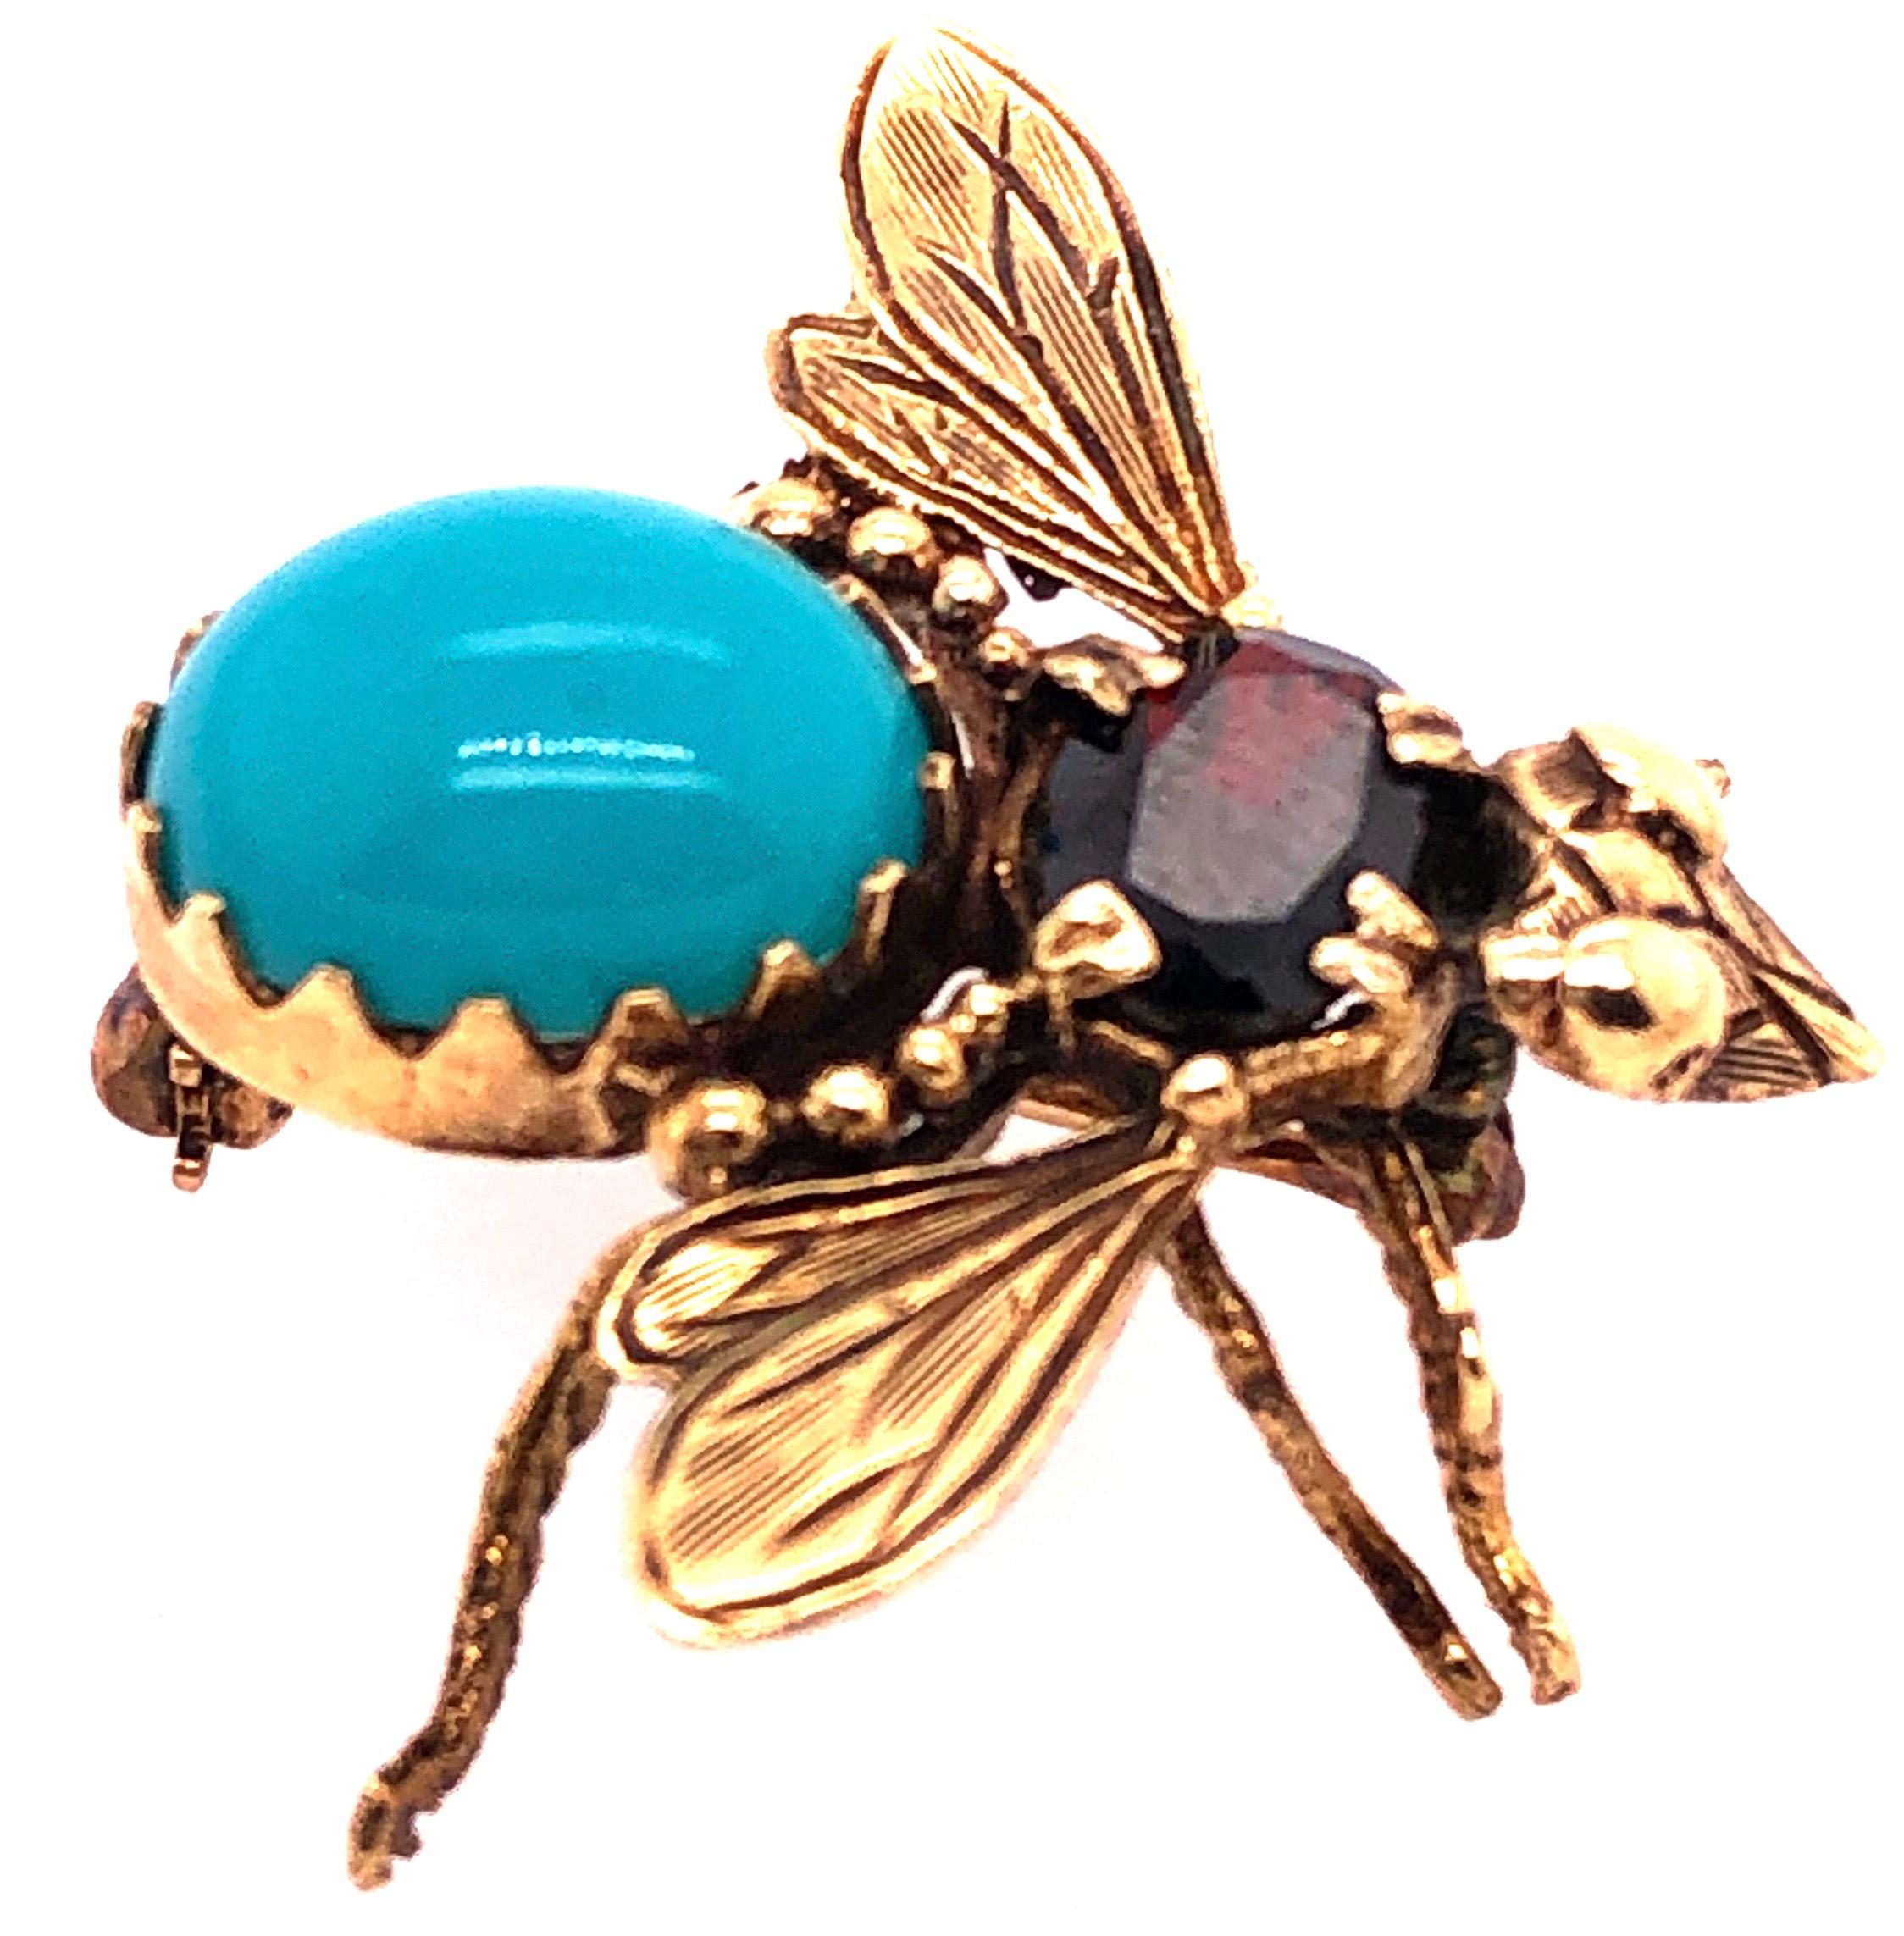 14 Karat Yellow Gold Bug / Insect Brooch with Semi Precious Stones
5.75 grams total weight.